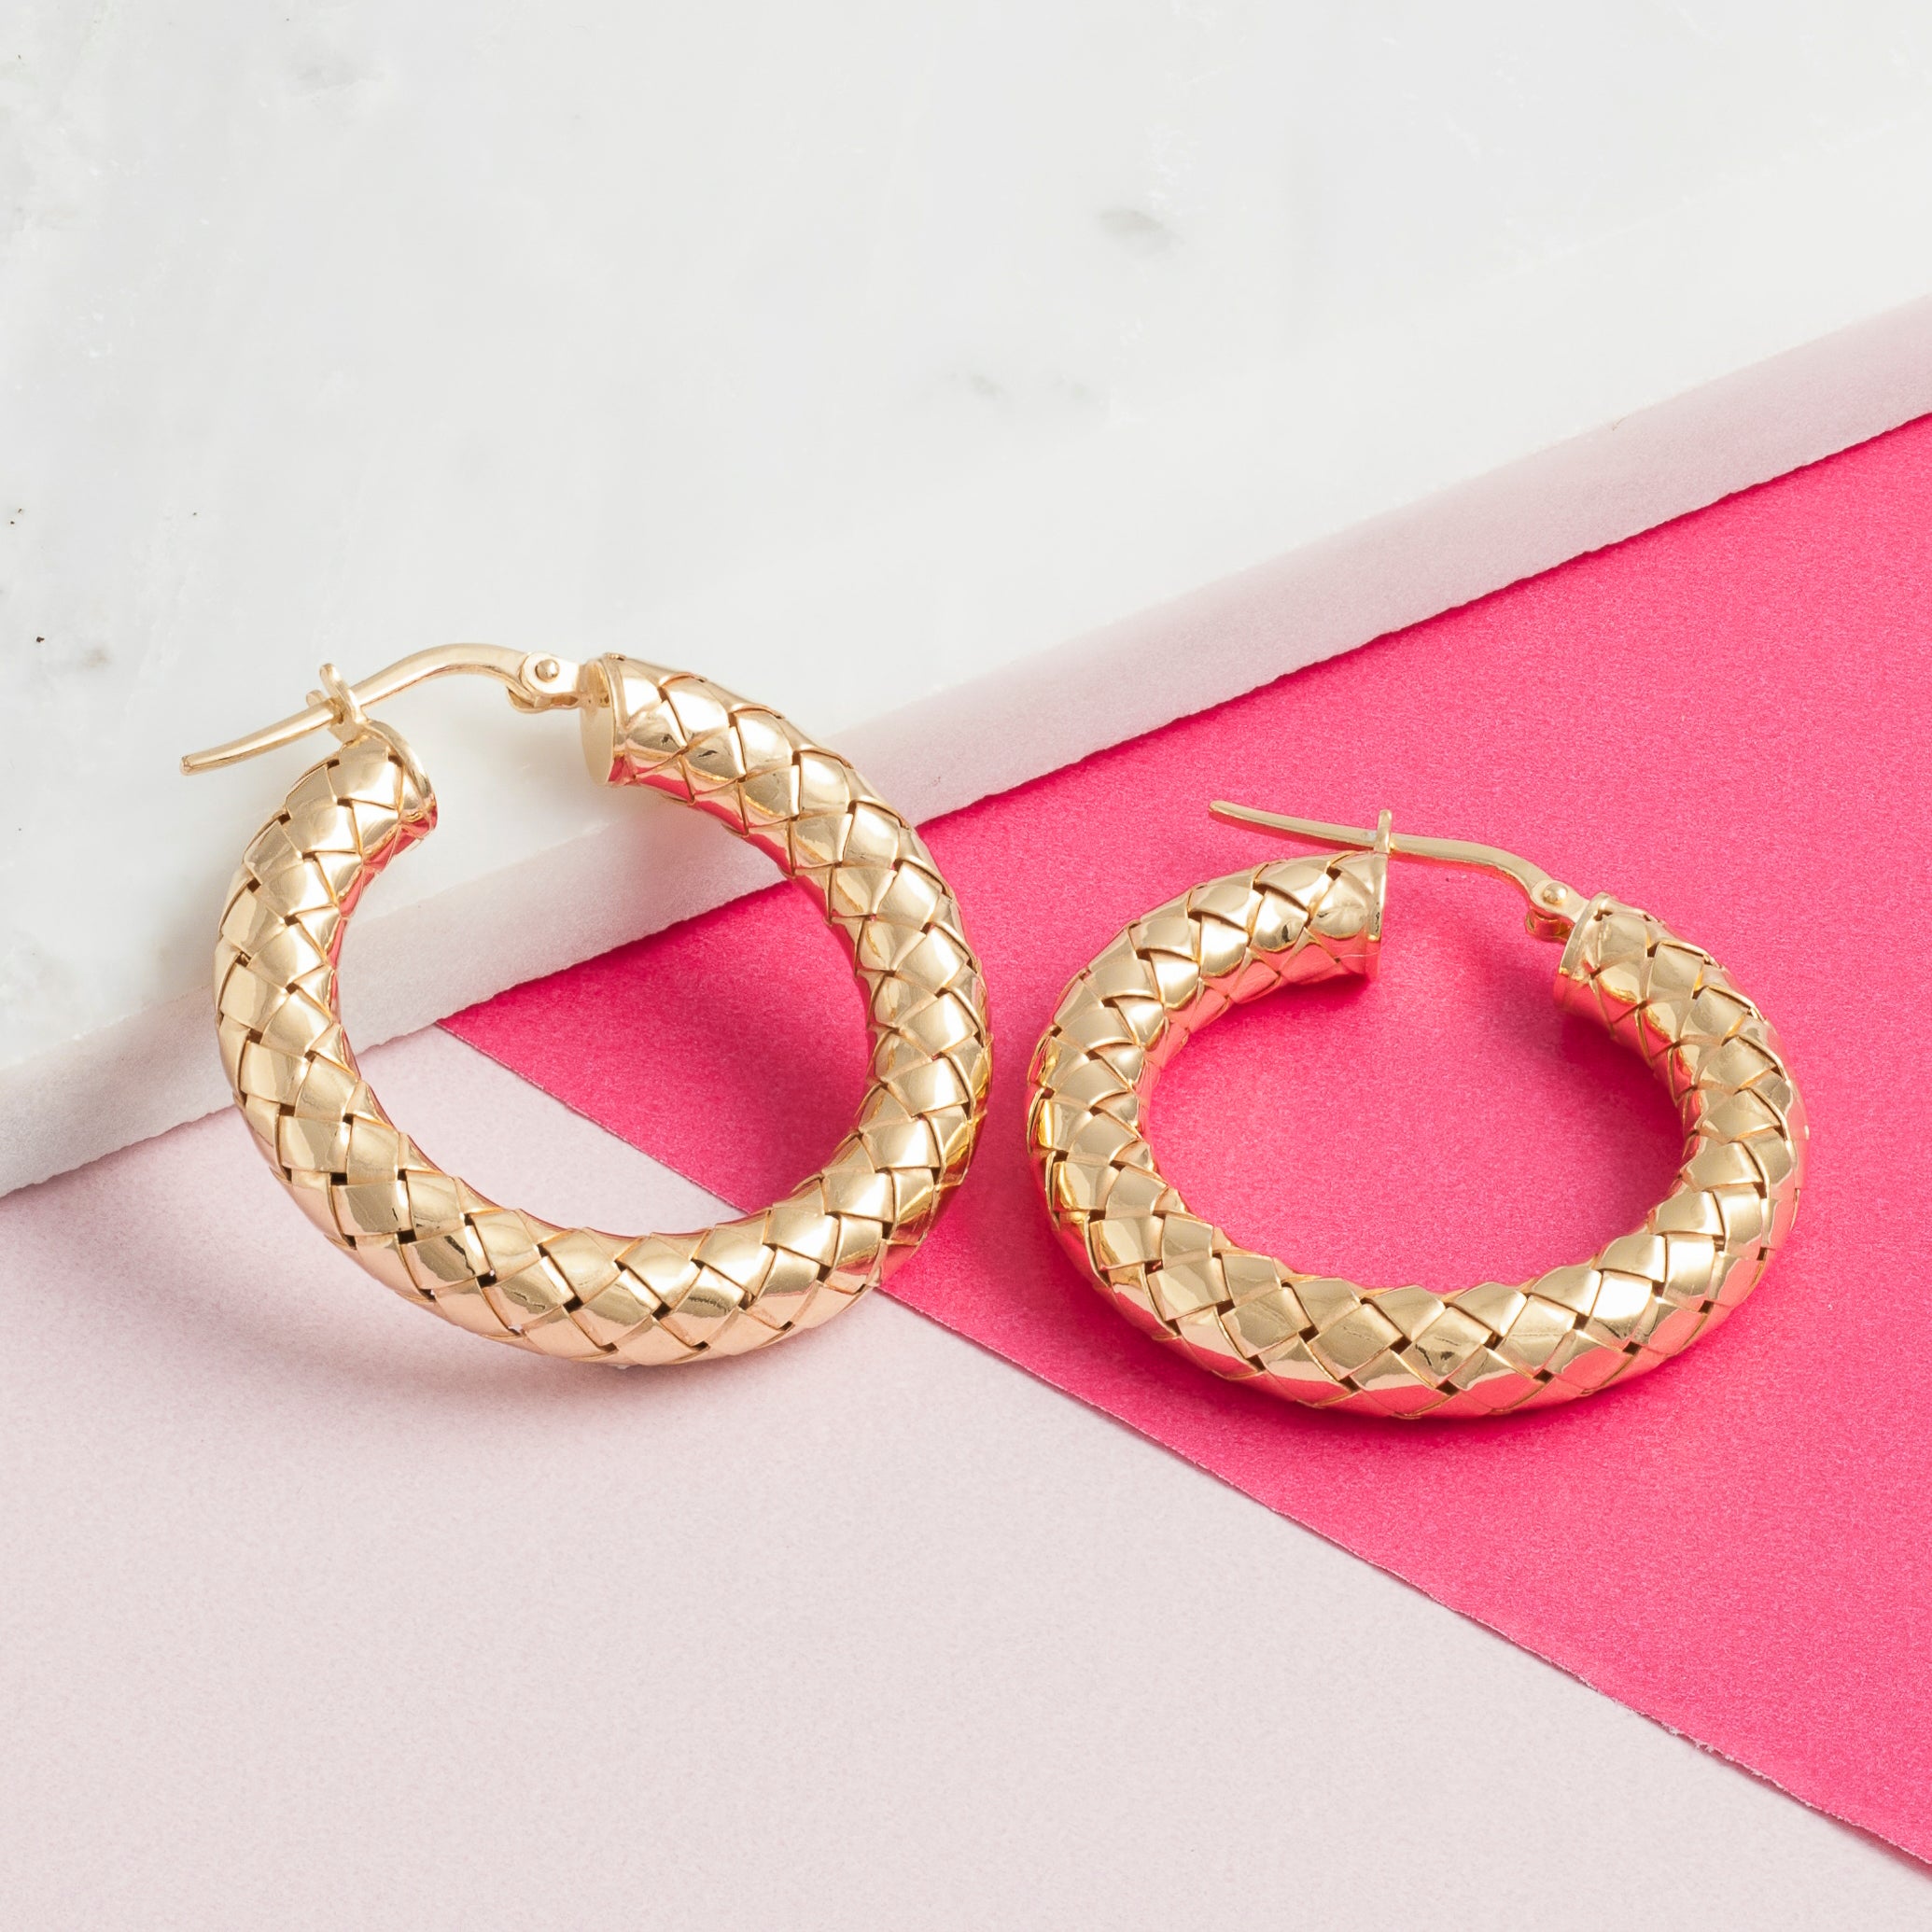 GOLD THICK WOVEN HOOPS